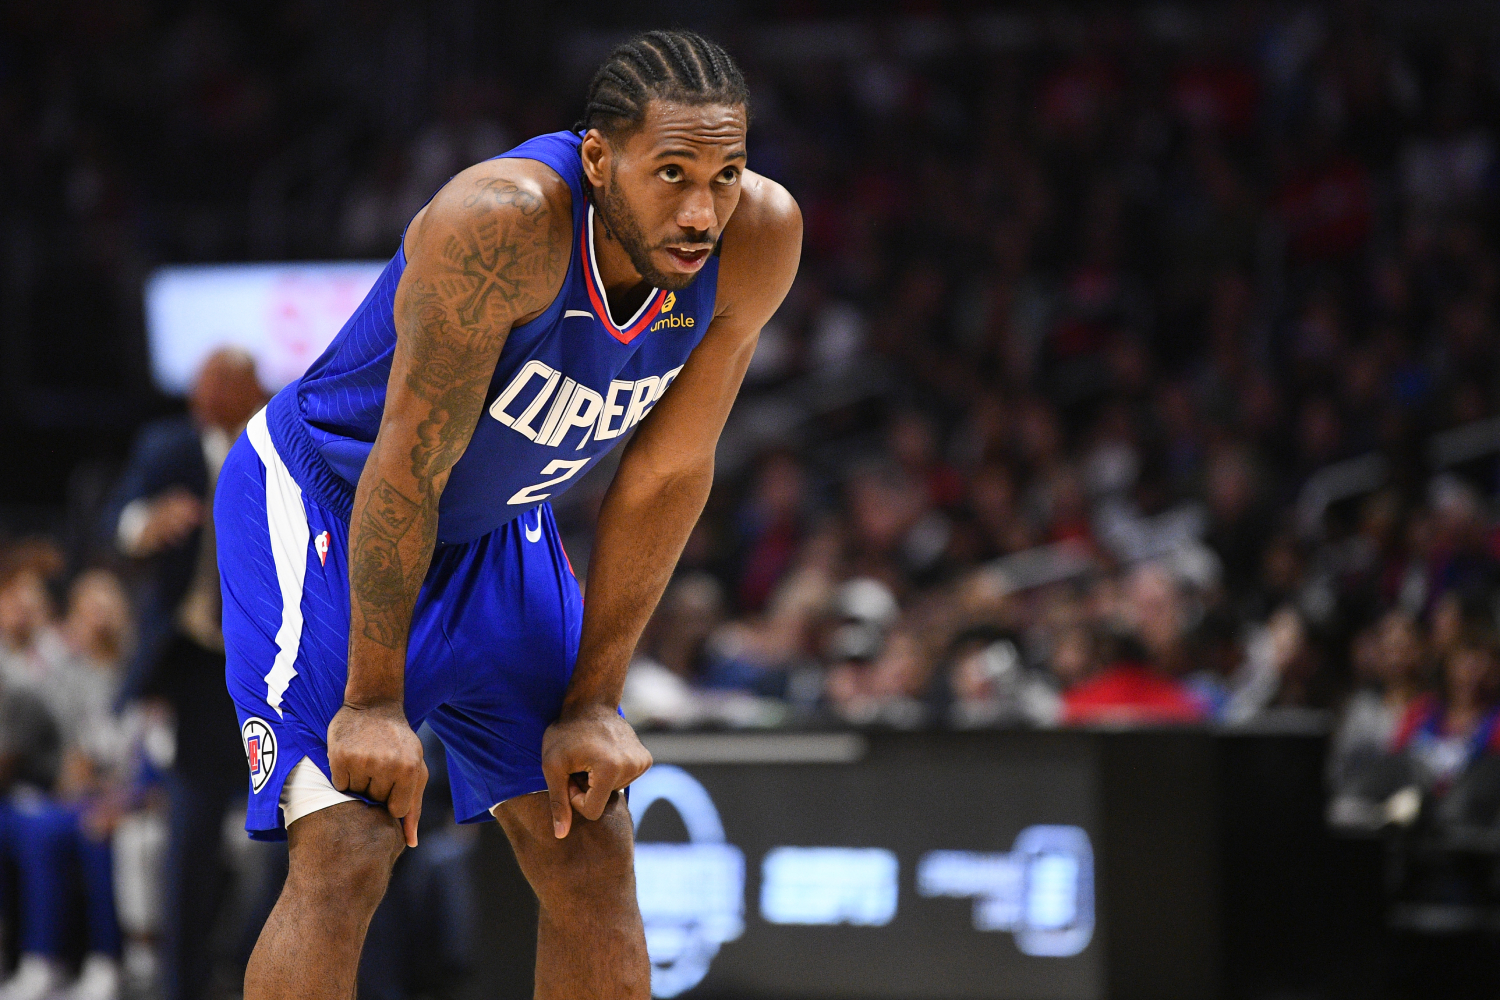 Kawhi Leonard is a superstar for the LA Clippers. He is now receiving Michael Jordan and Kobe Bryant treatment on the court, too.